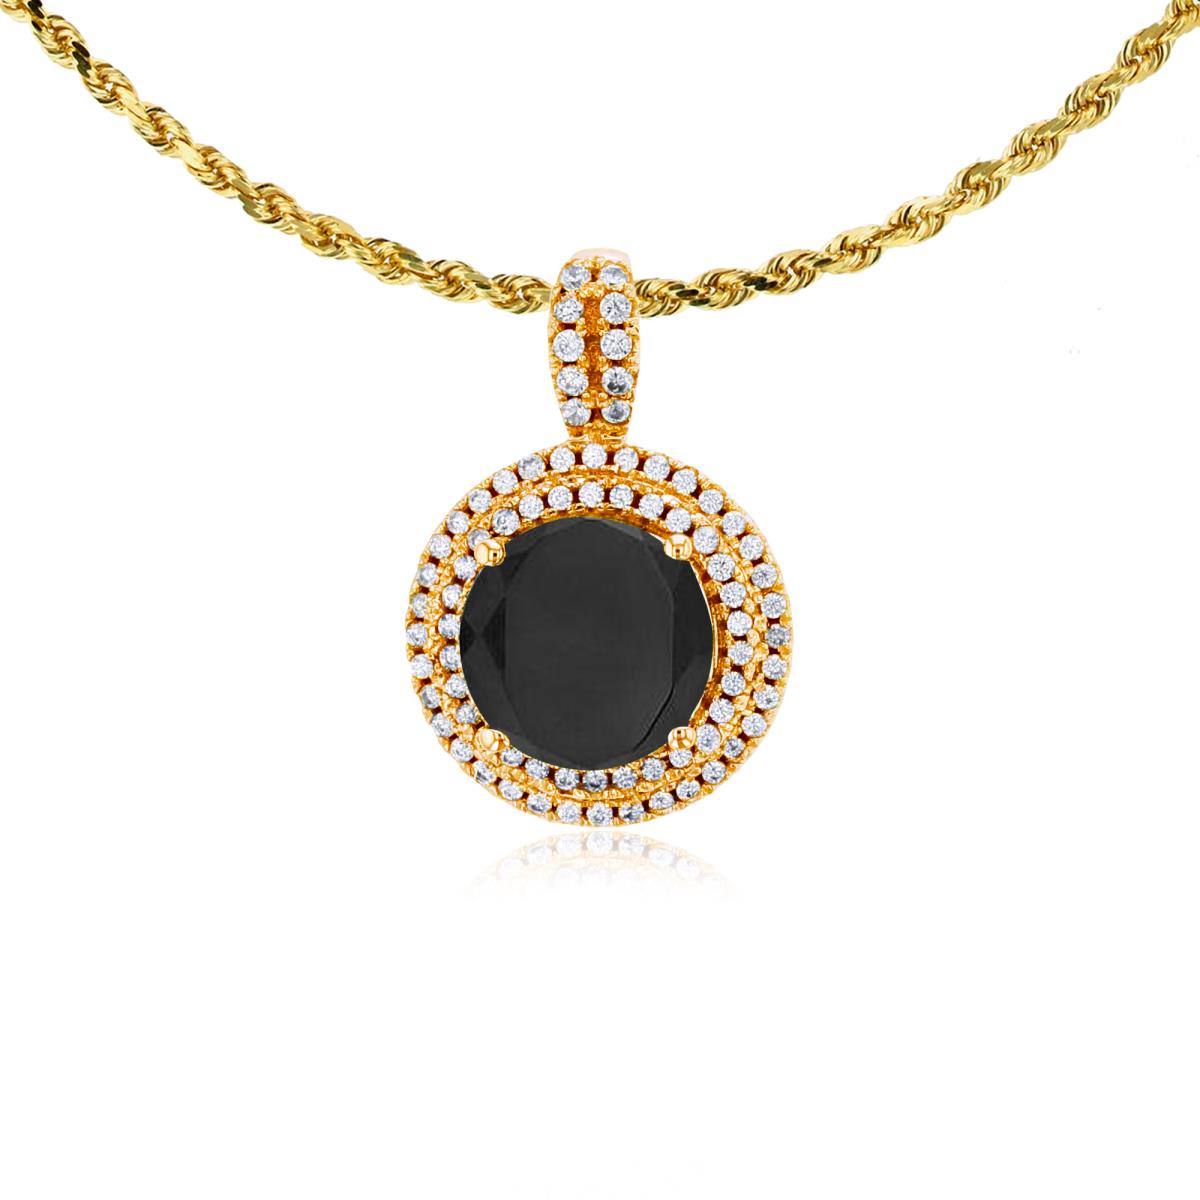 10K Yellow Gold 7mm Round Onyx & 0.25 CTTW Diamonds Double Halo 18" Rope Chain Necklace